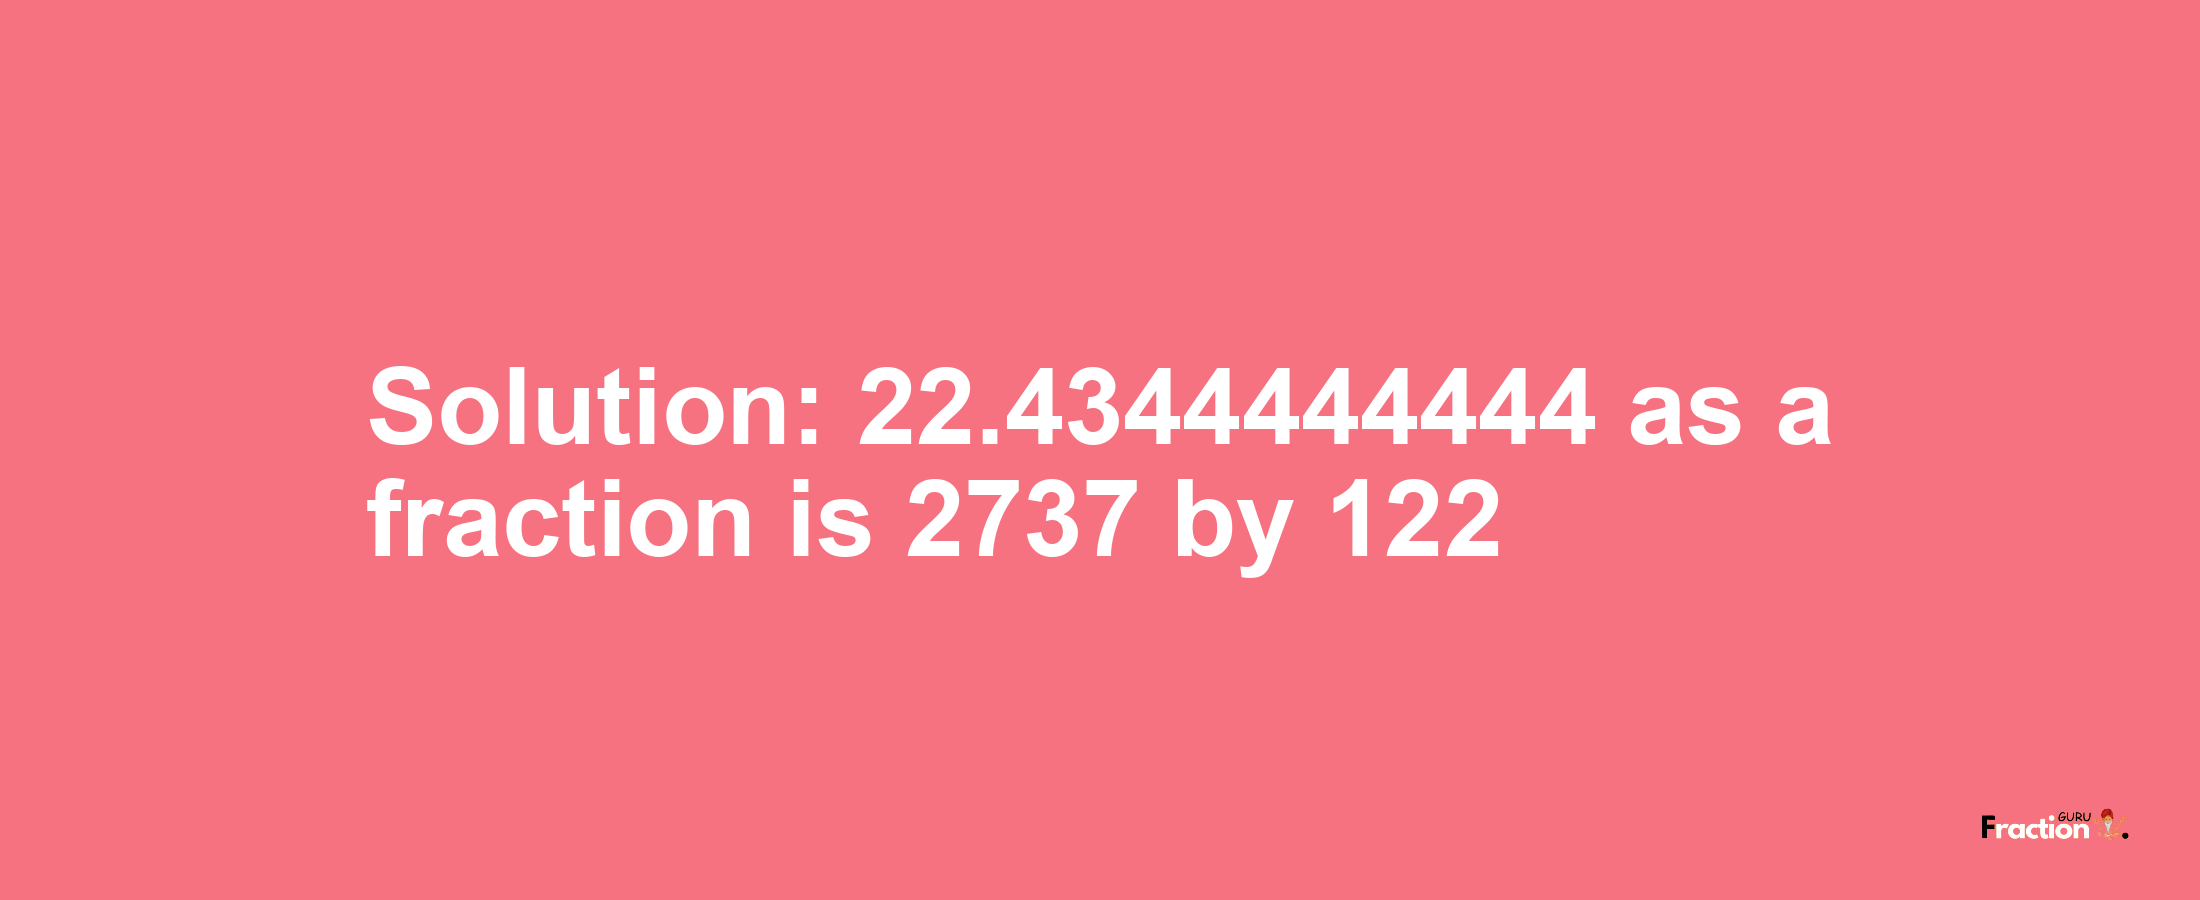 Solution:22.4344444444 as a fraction is 2737/122